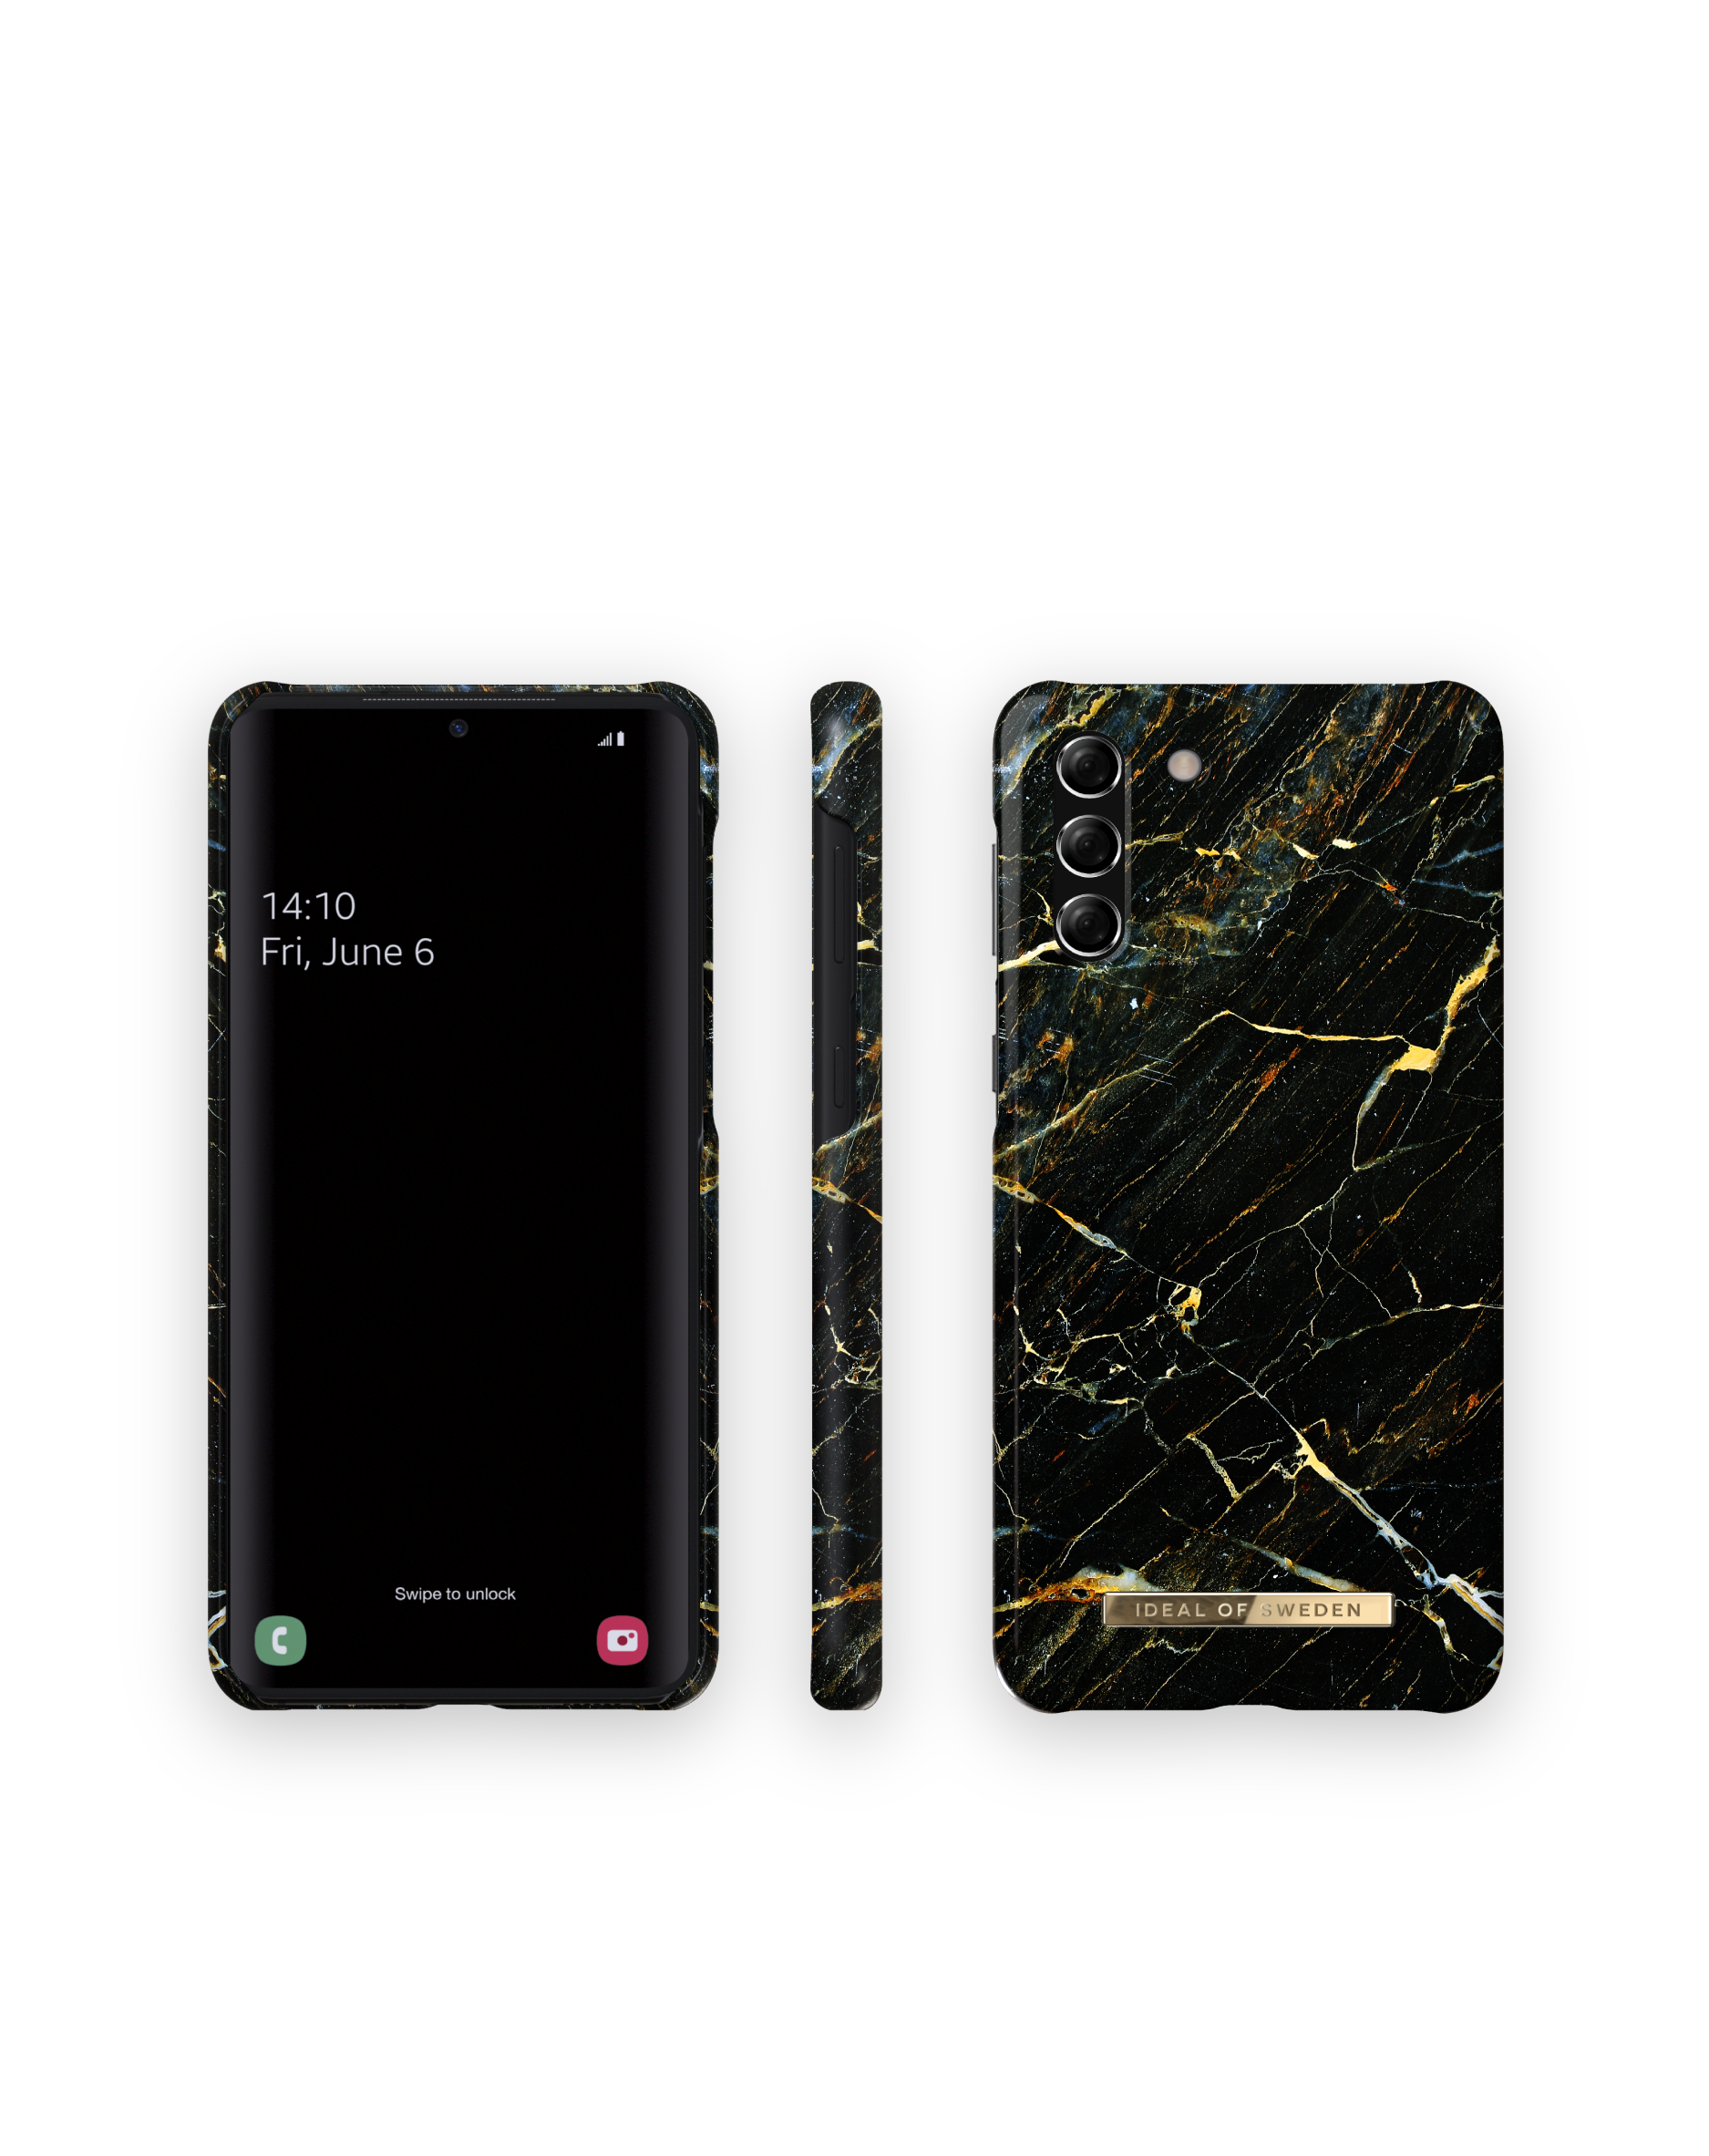 Marble Samsung, SWEDEN IDFCA16-S21P-49, Galaxy OF Laurent Port IDEAL Backcover, S21+,